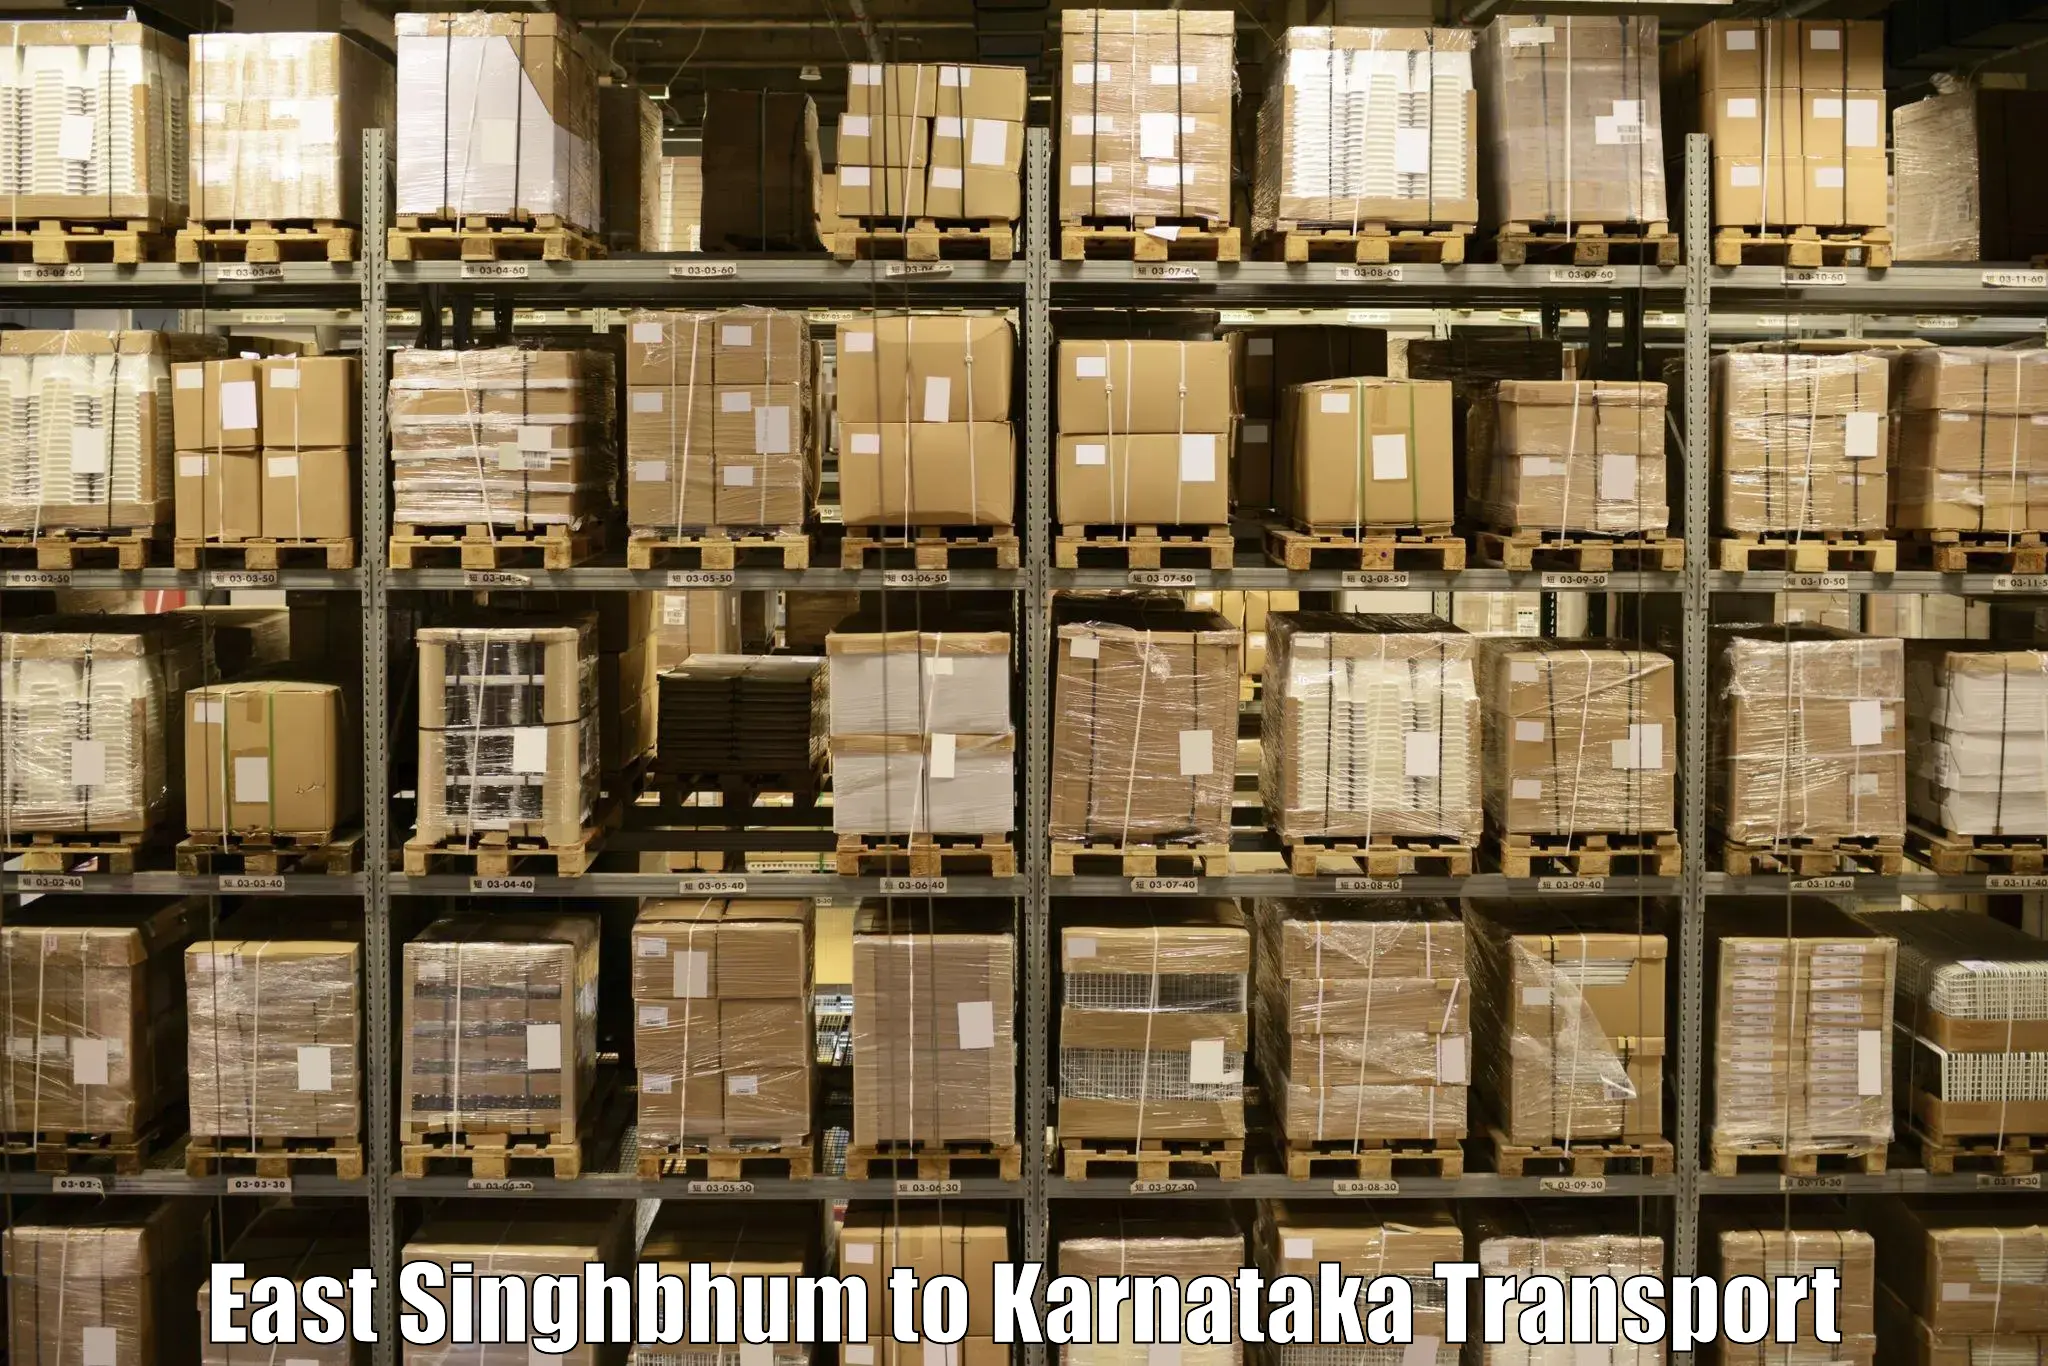 Best transport services in India East Singhbhum to Nelamangala